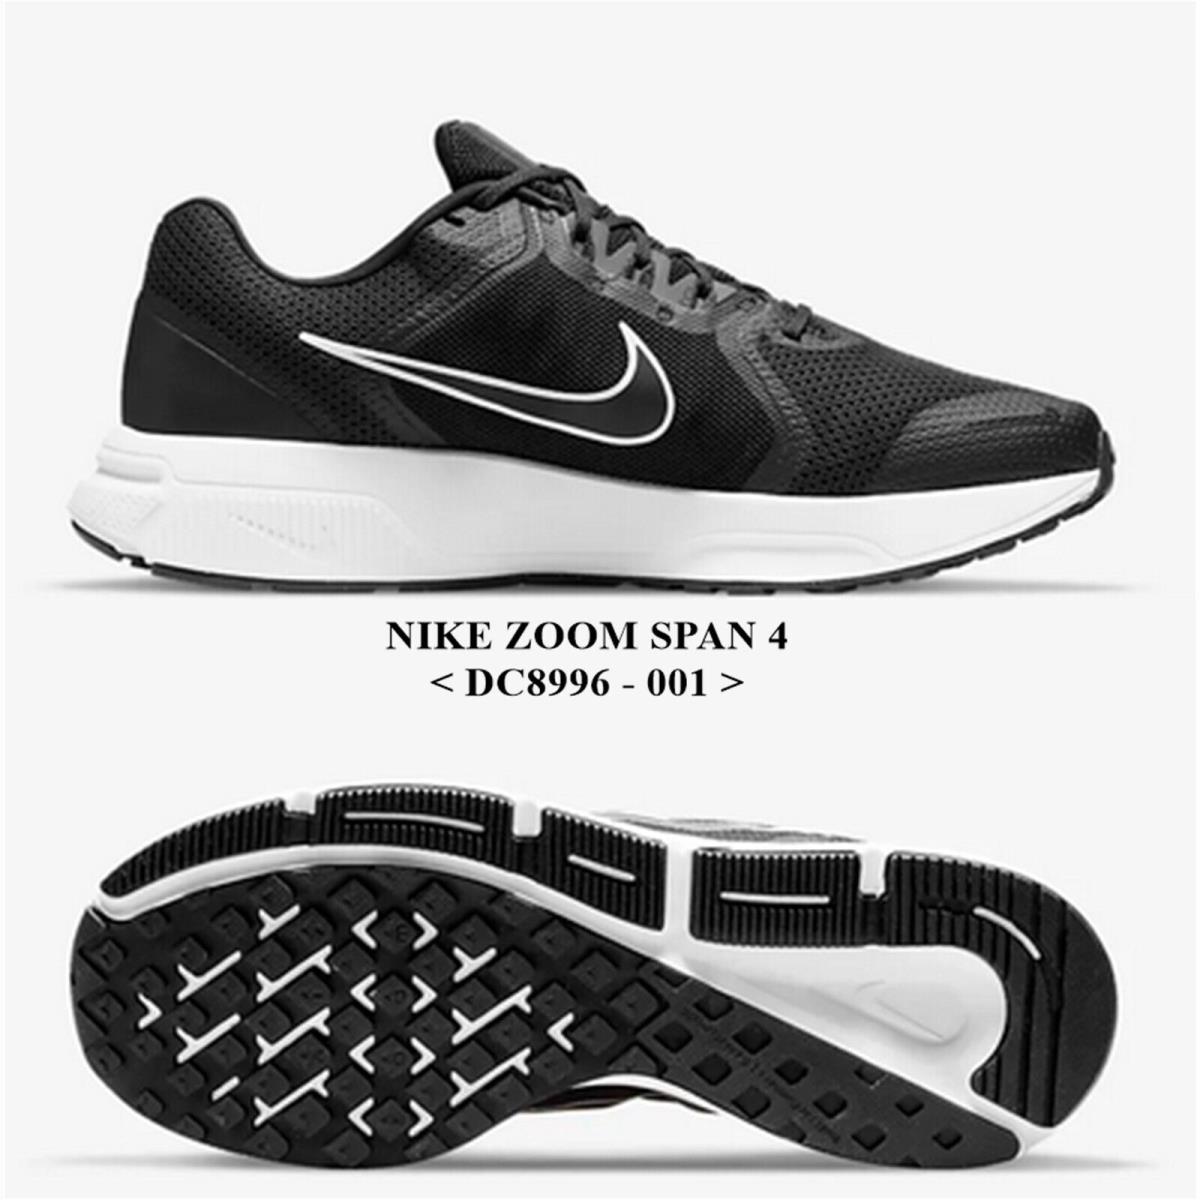 Nike Zoom Span 4 DC8996 -001 Men`s Running Shoes.new with Box NO Lid - BLACK/WHITE